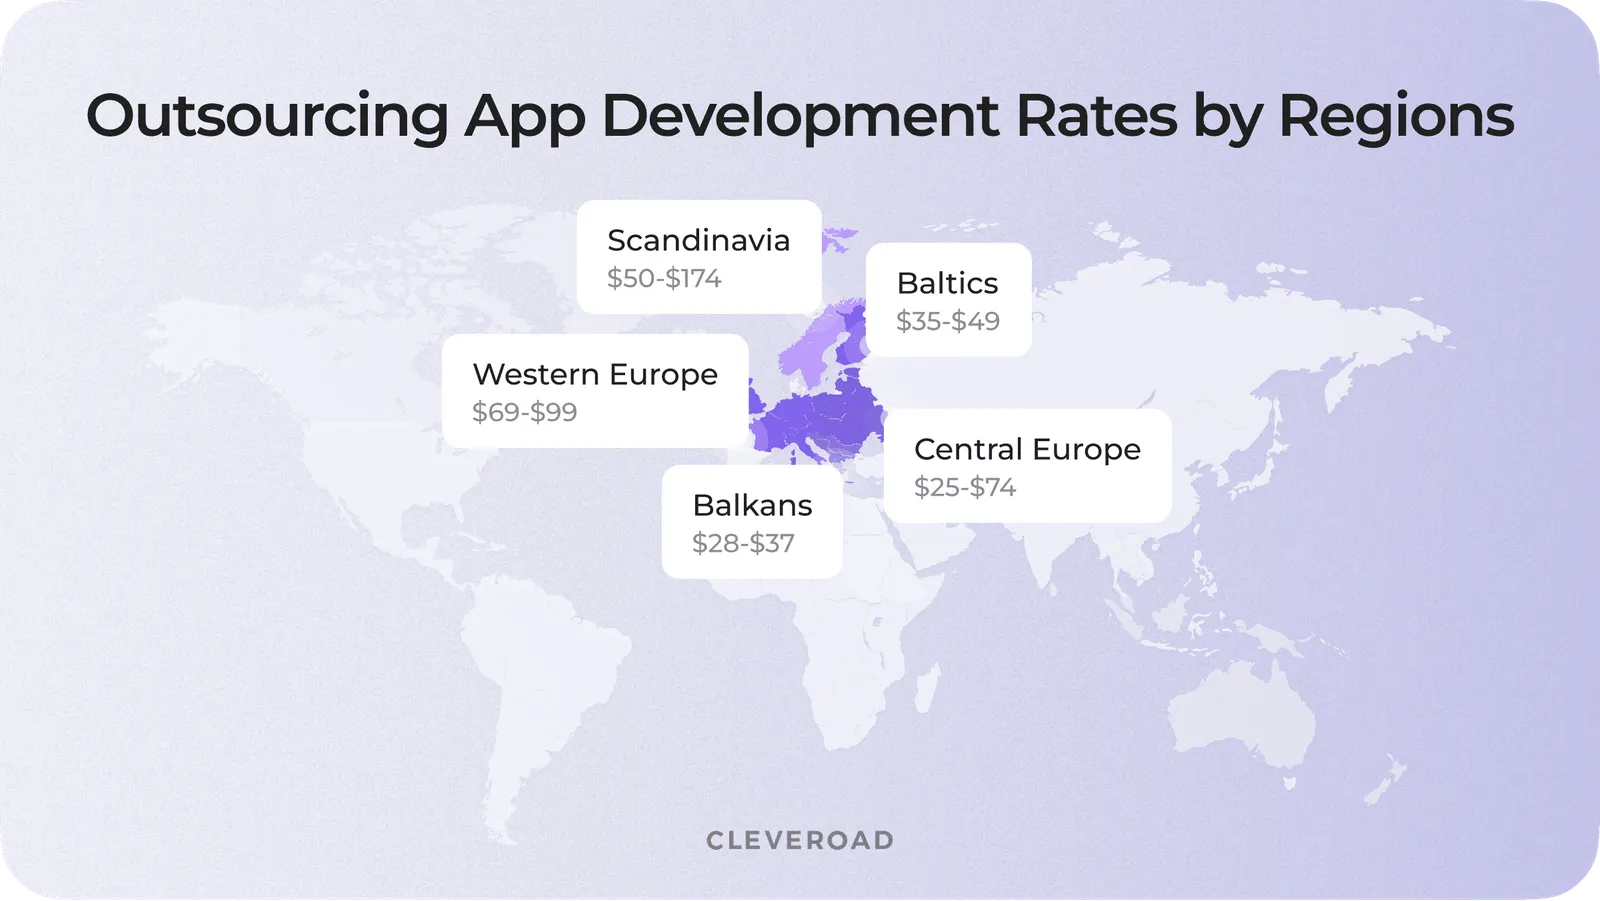 Outsourcing app development rates globally